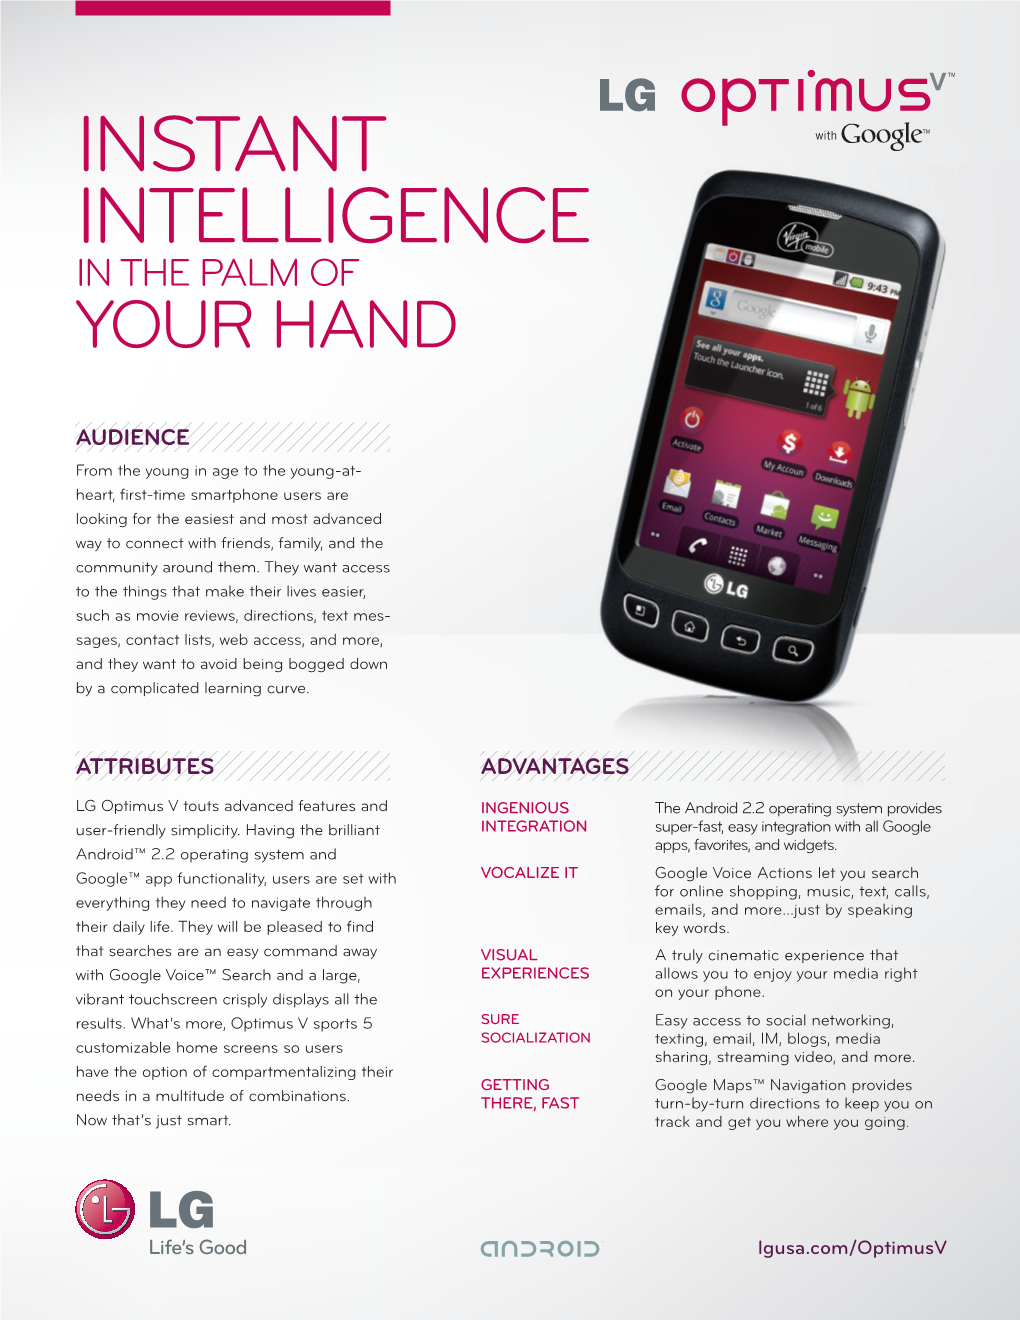 Instant Intelligence in the Palm of Your Hand